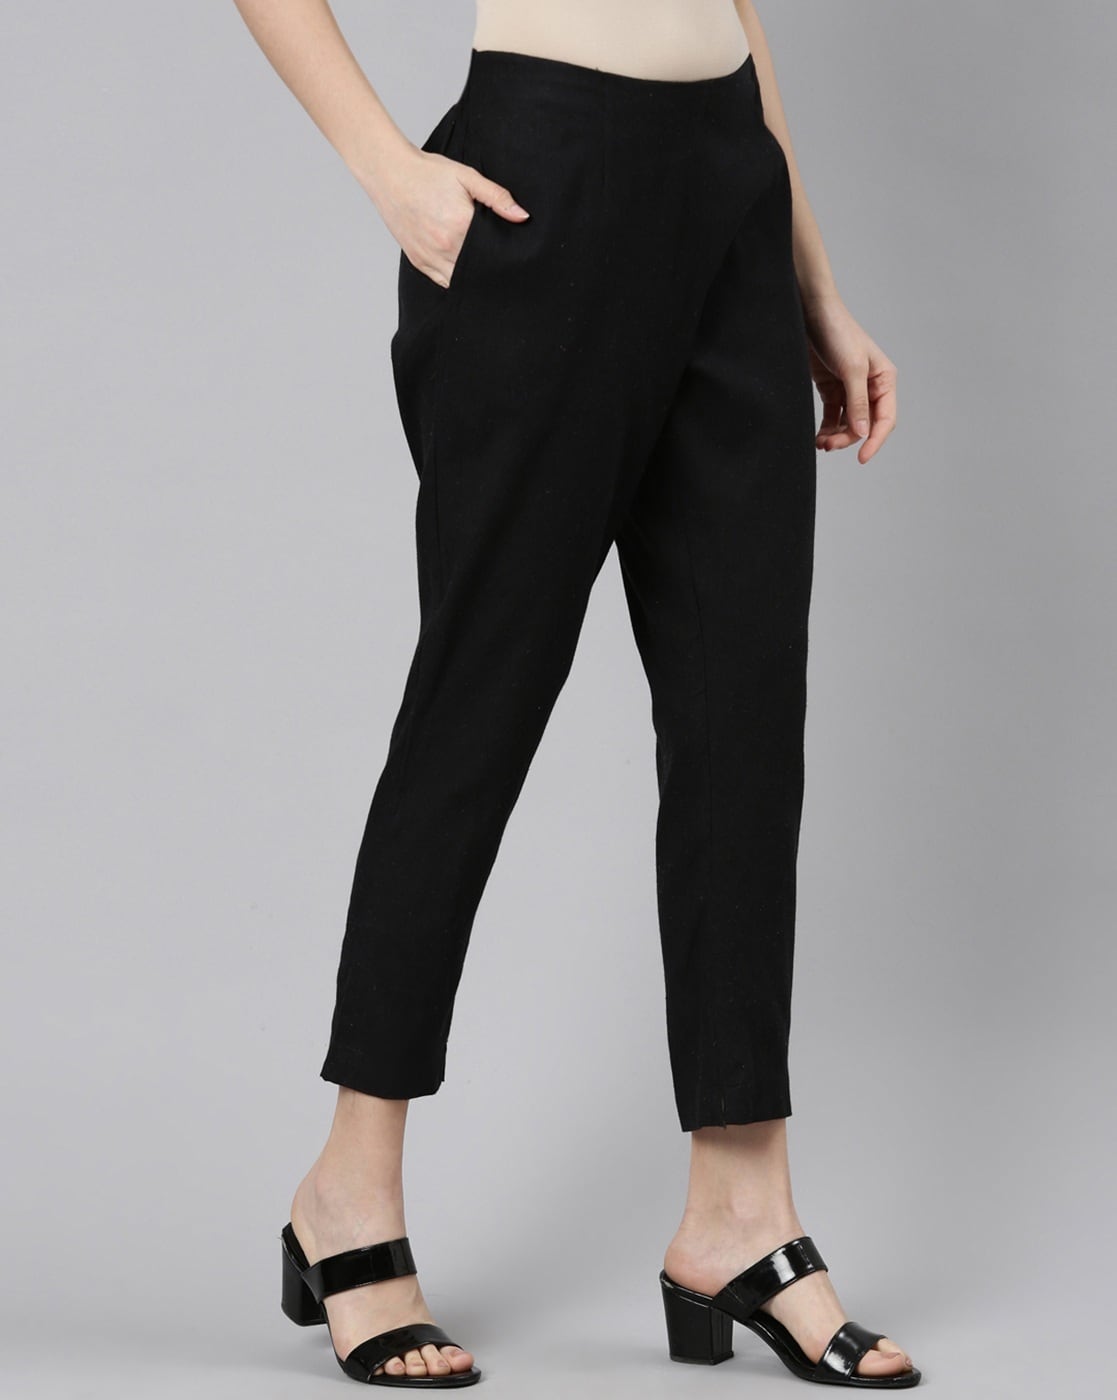 Buy Black Trousers & Pants for Men by MUFTI Online | Ajio.com